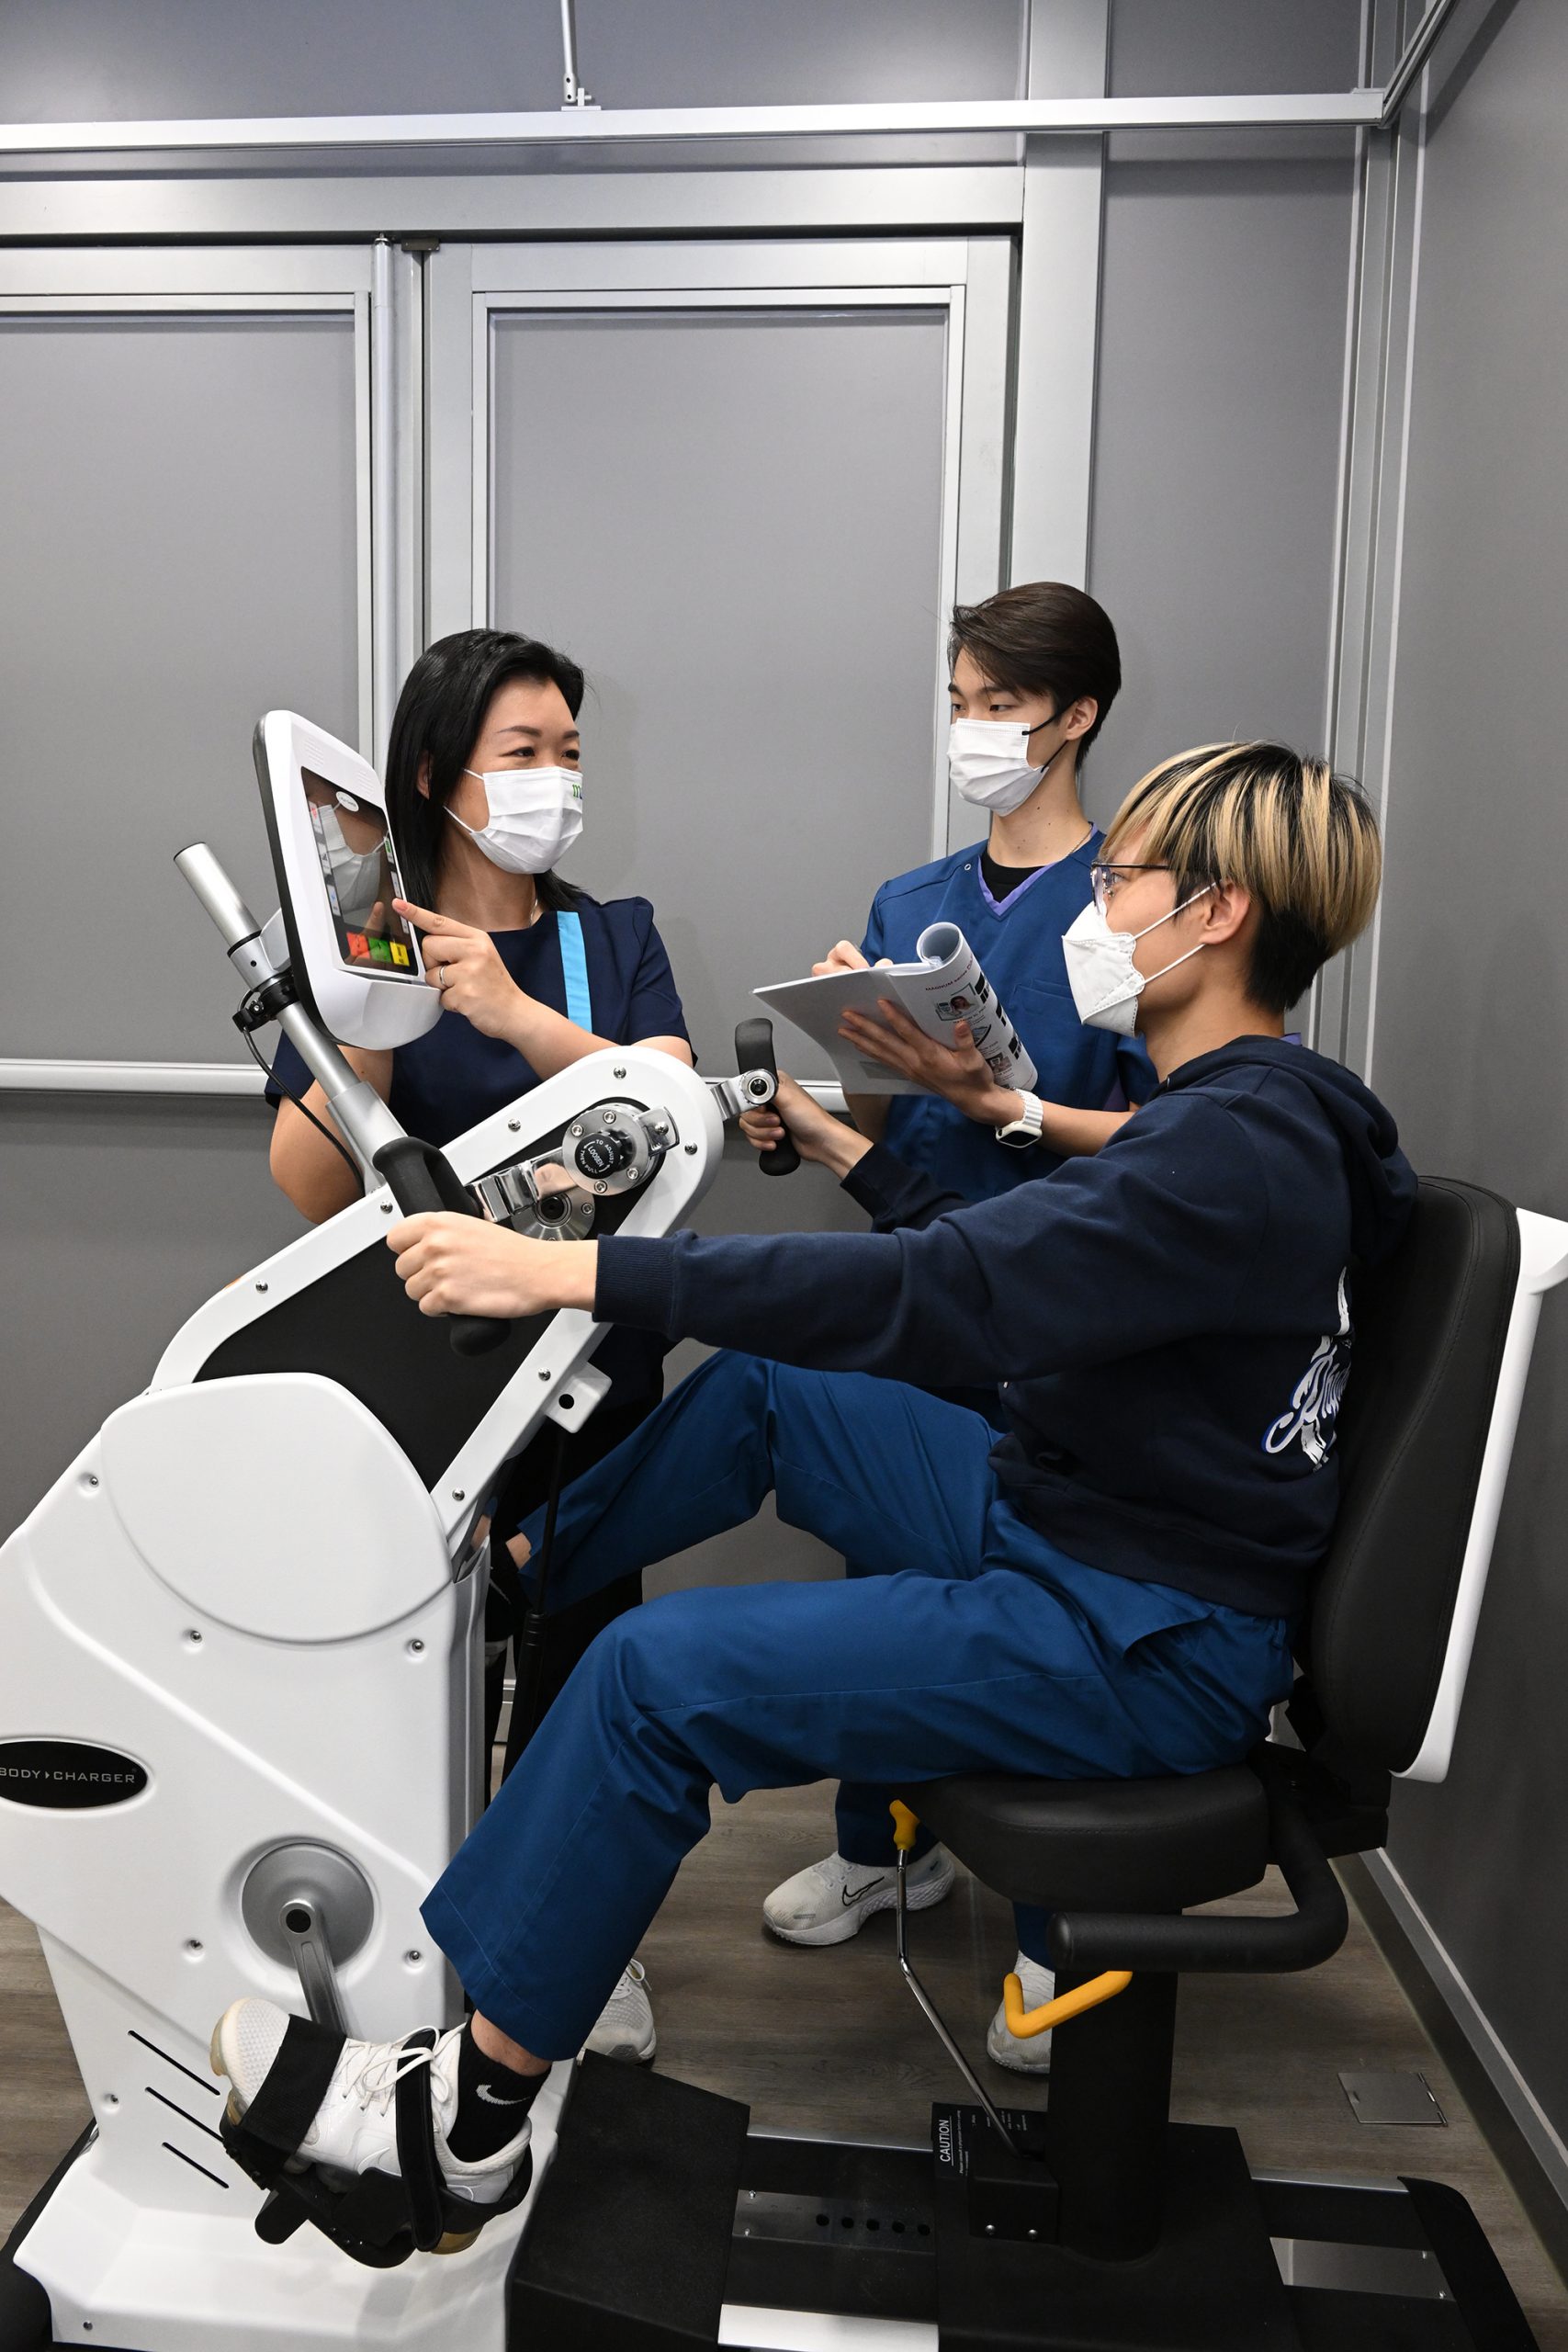 In addition to providing a clinical practicum for its physiotherapy students, the HKMU Physiotherapy Centre will facilitate talent development, community services and knowledge transfer, enabling HKMU staff members and students, and other members of the community to enjoy professional treatment.